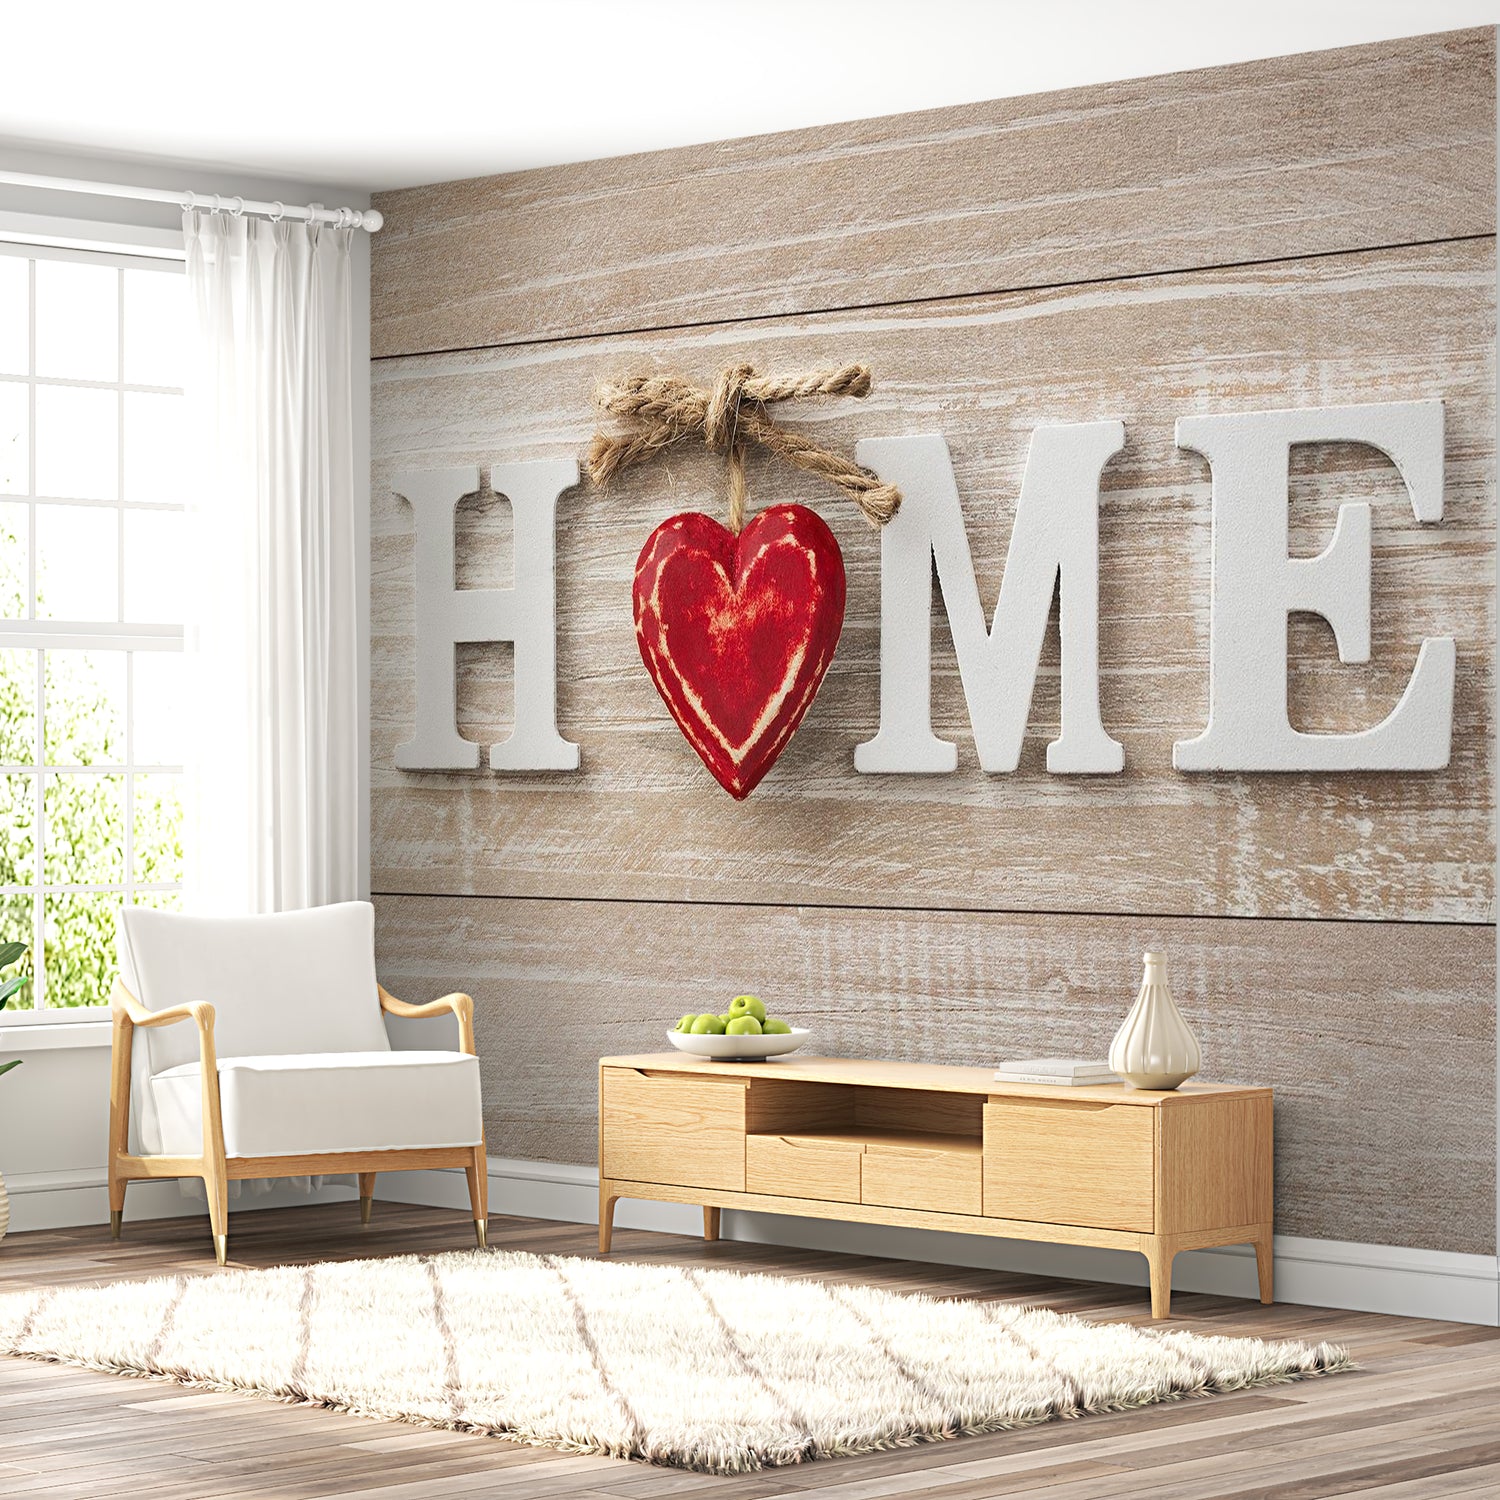 Peel & Stick Wall Mural - Home Red Heart On Wood - Removable Wall Decals